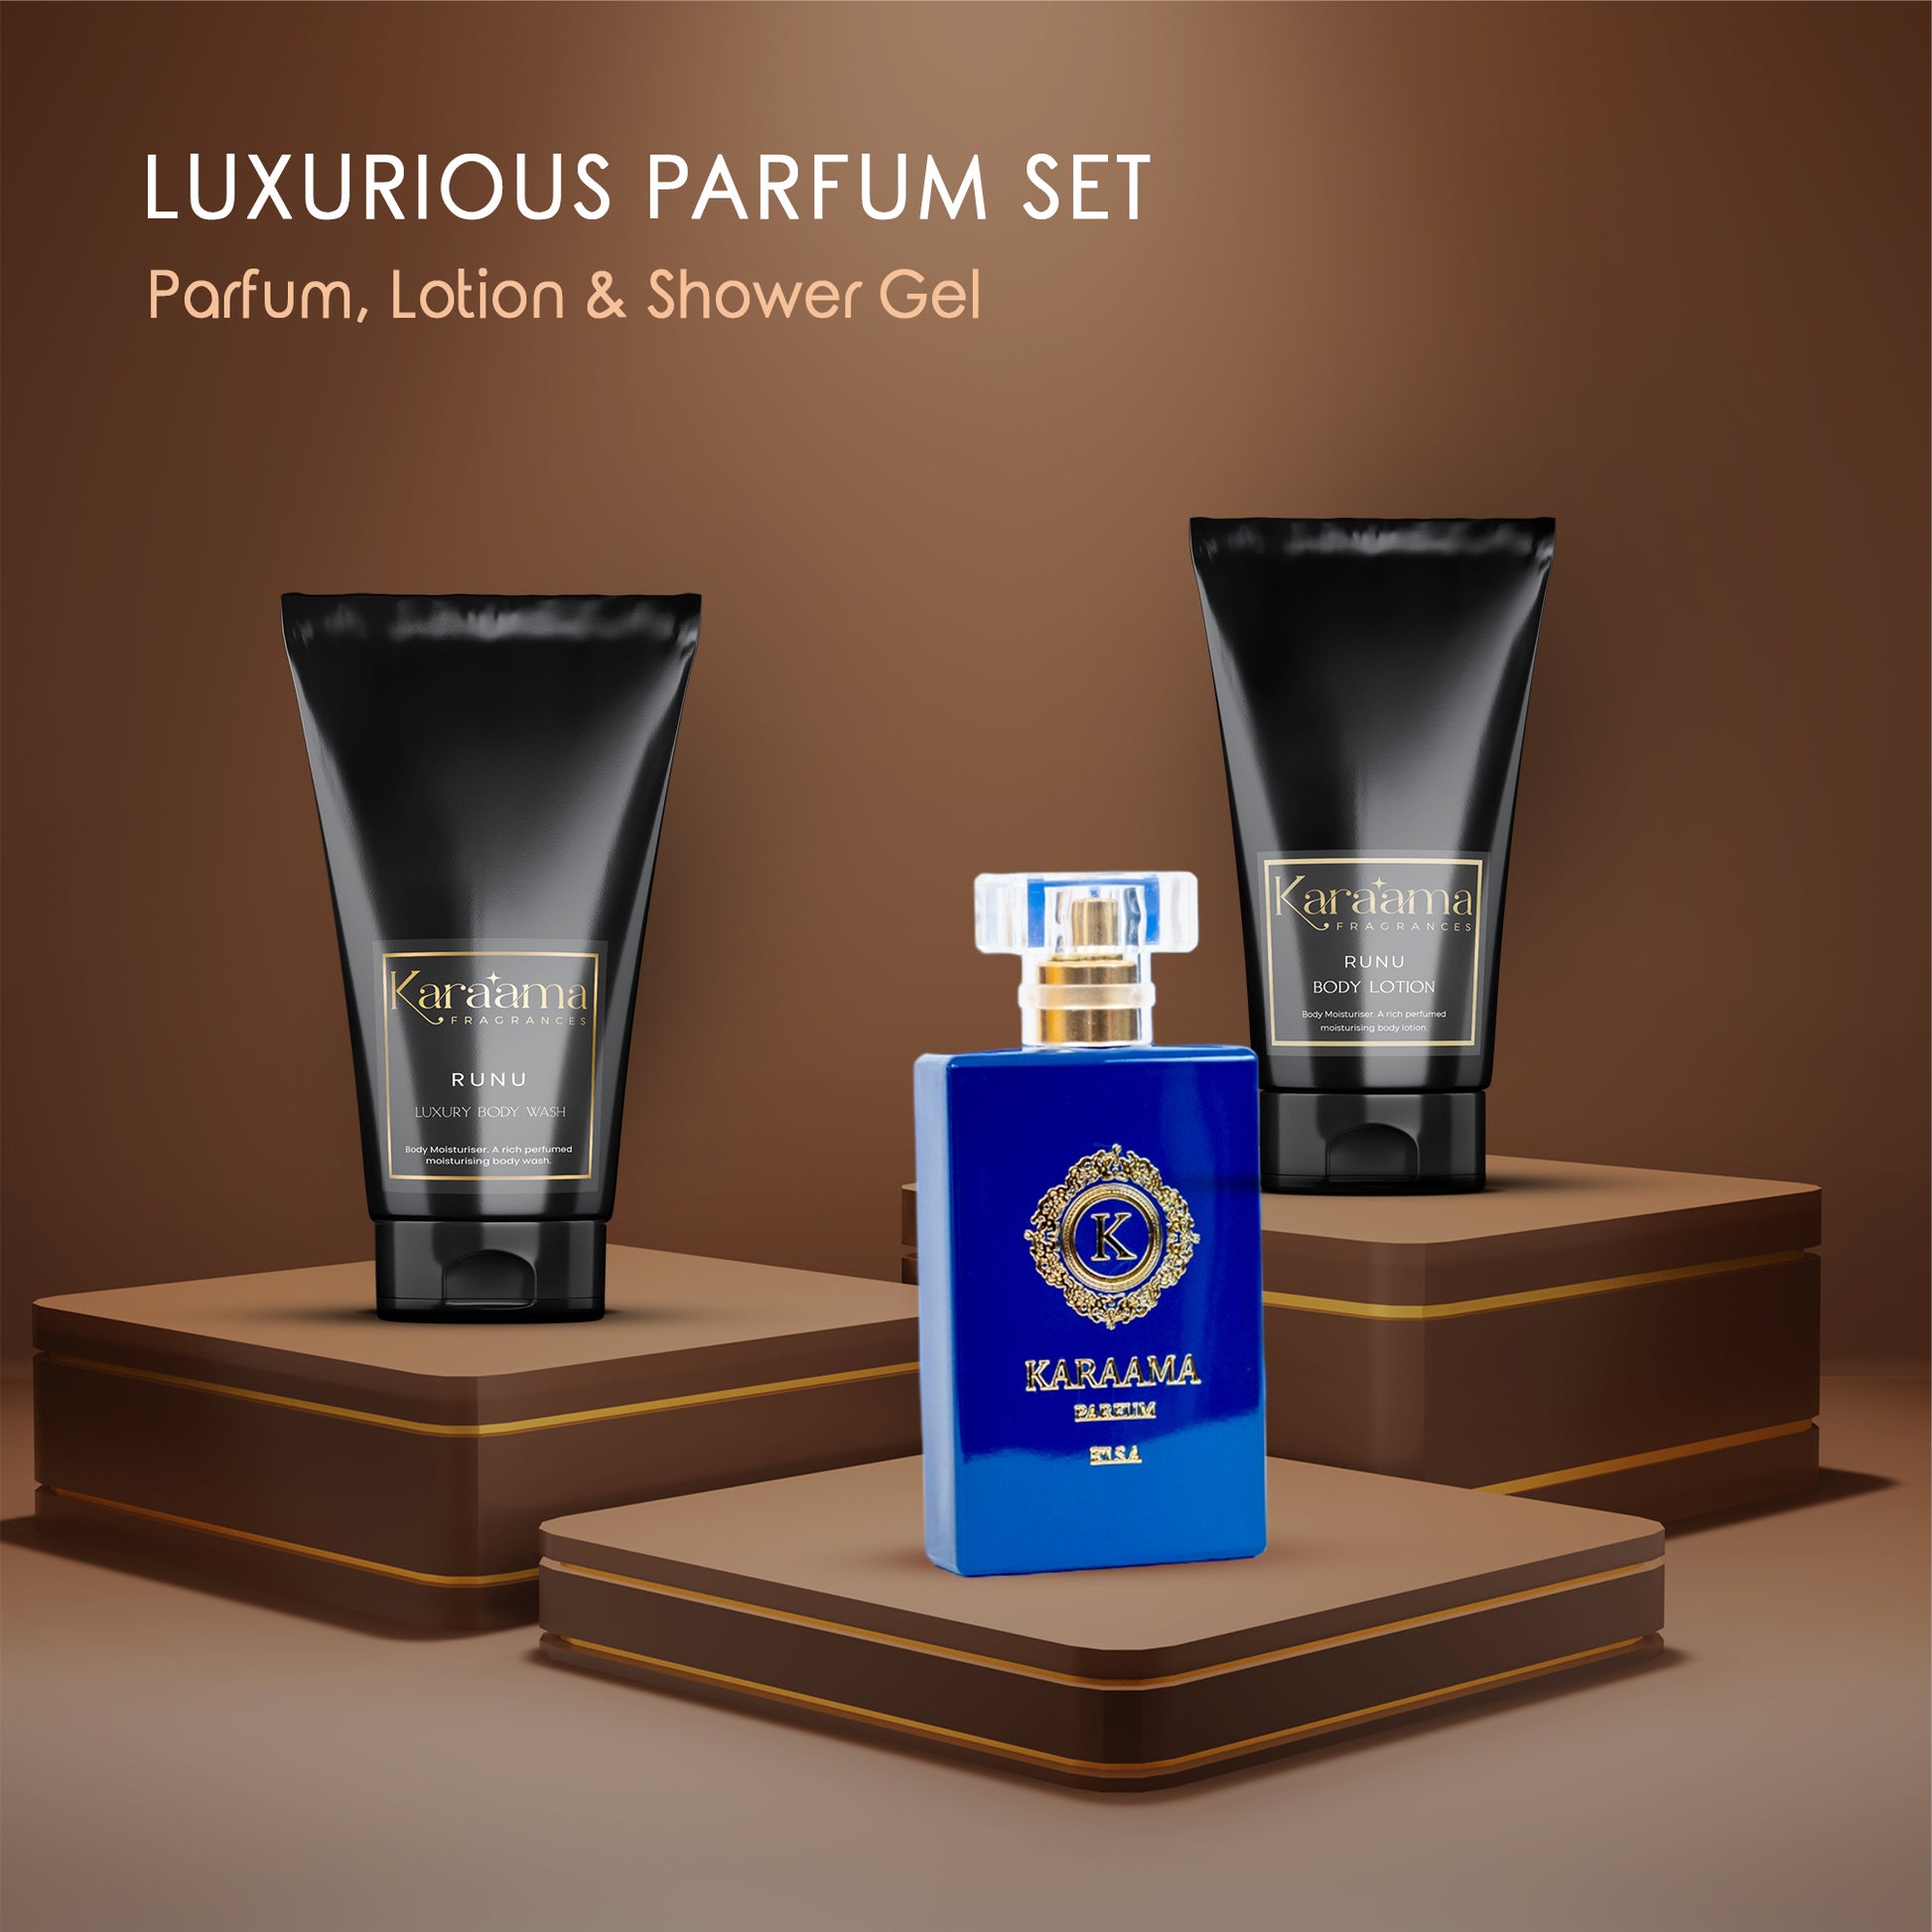 "Elevate your daily routine with this luxurious Karazma Parfum Set featuring premium perfumes, body lotion, and shower gel, presented on sleek brown pedestals for a touch of elegance."